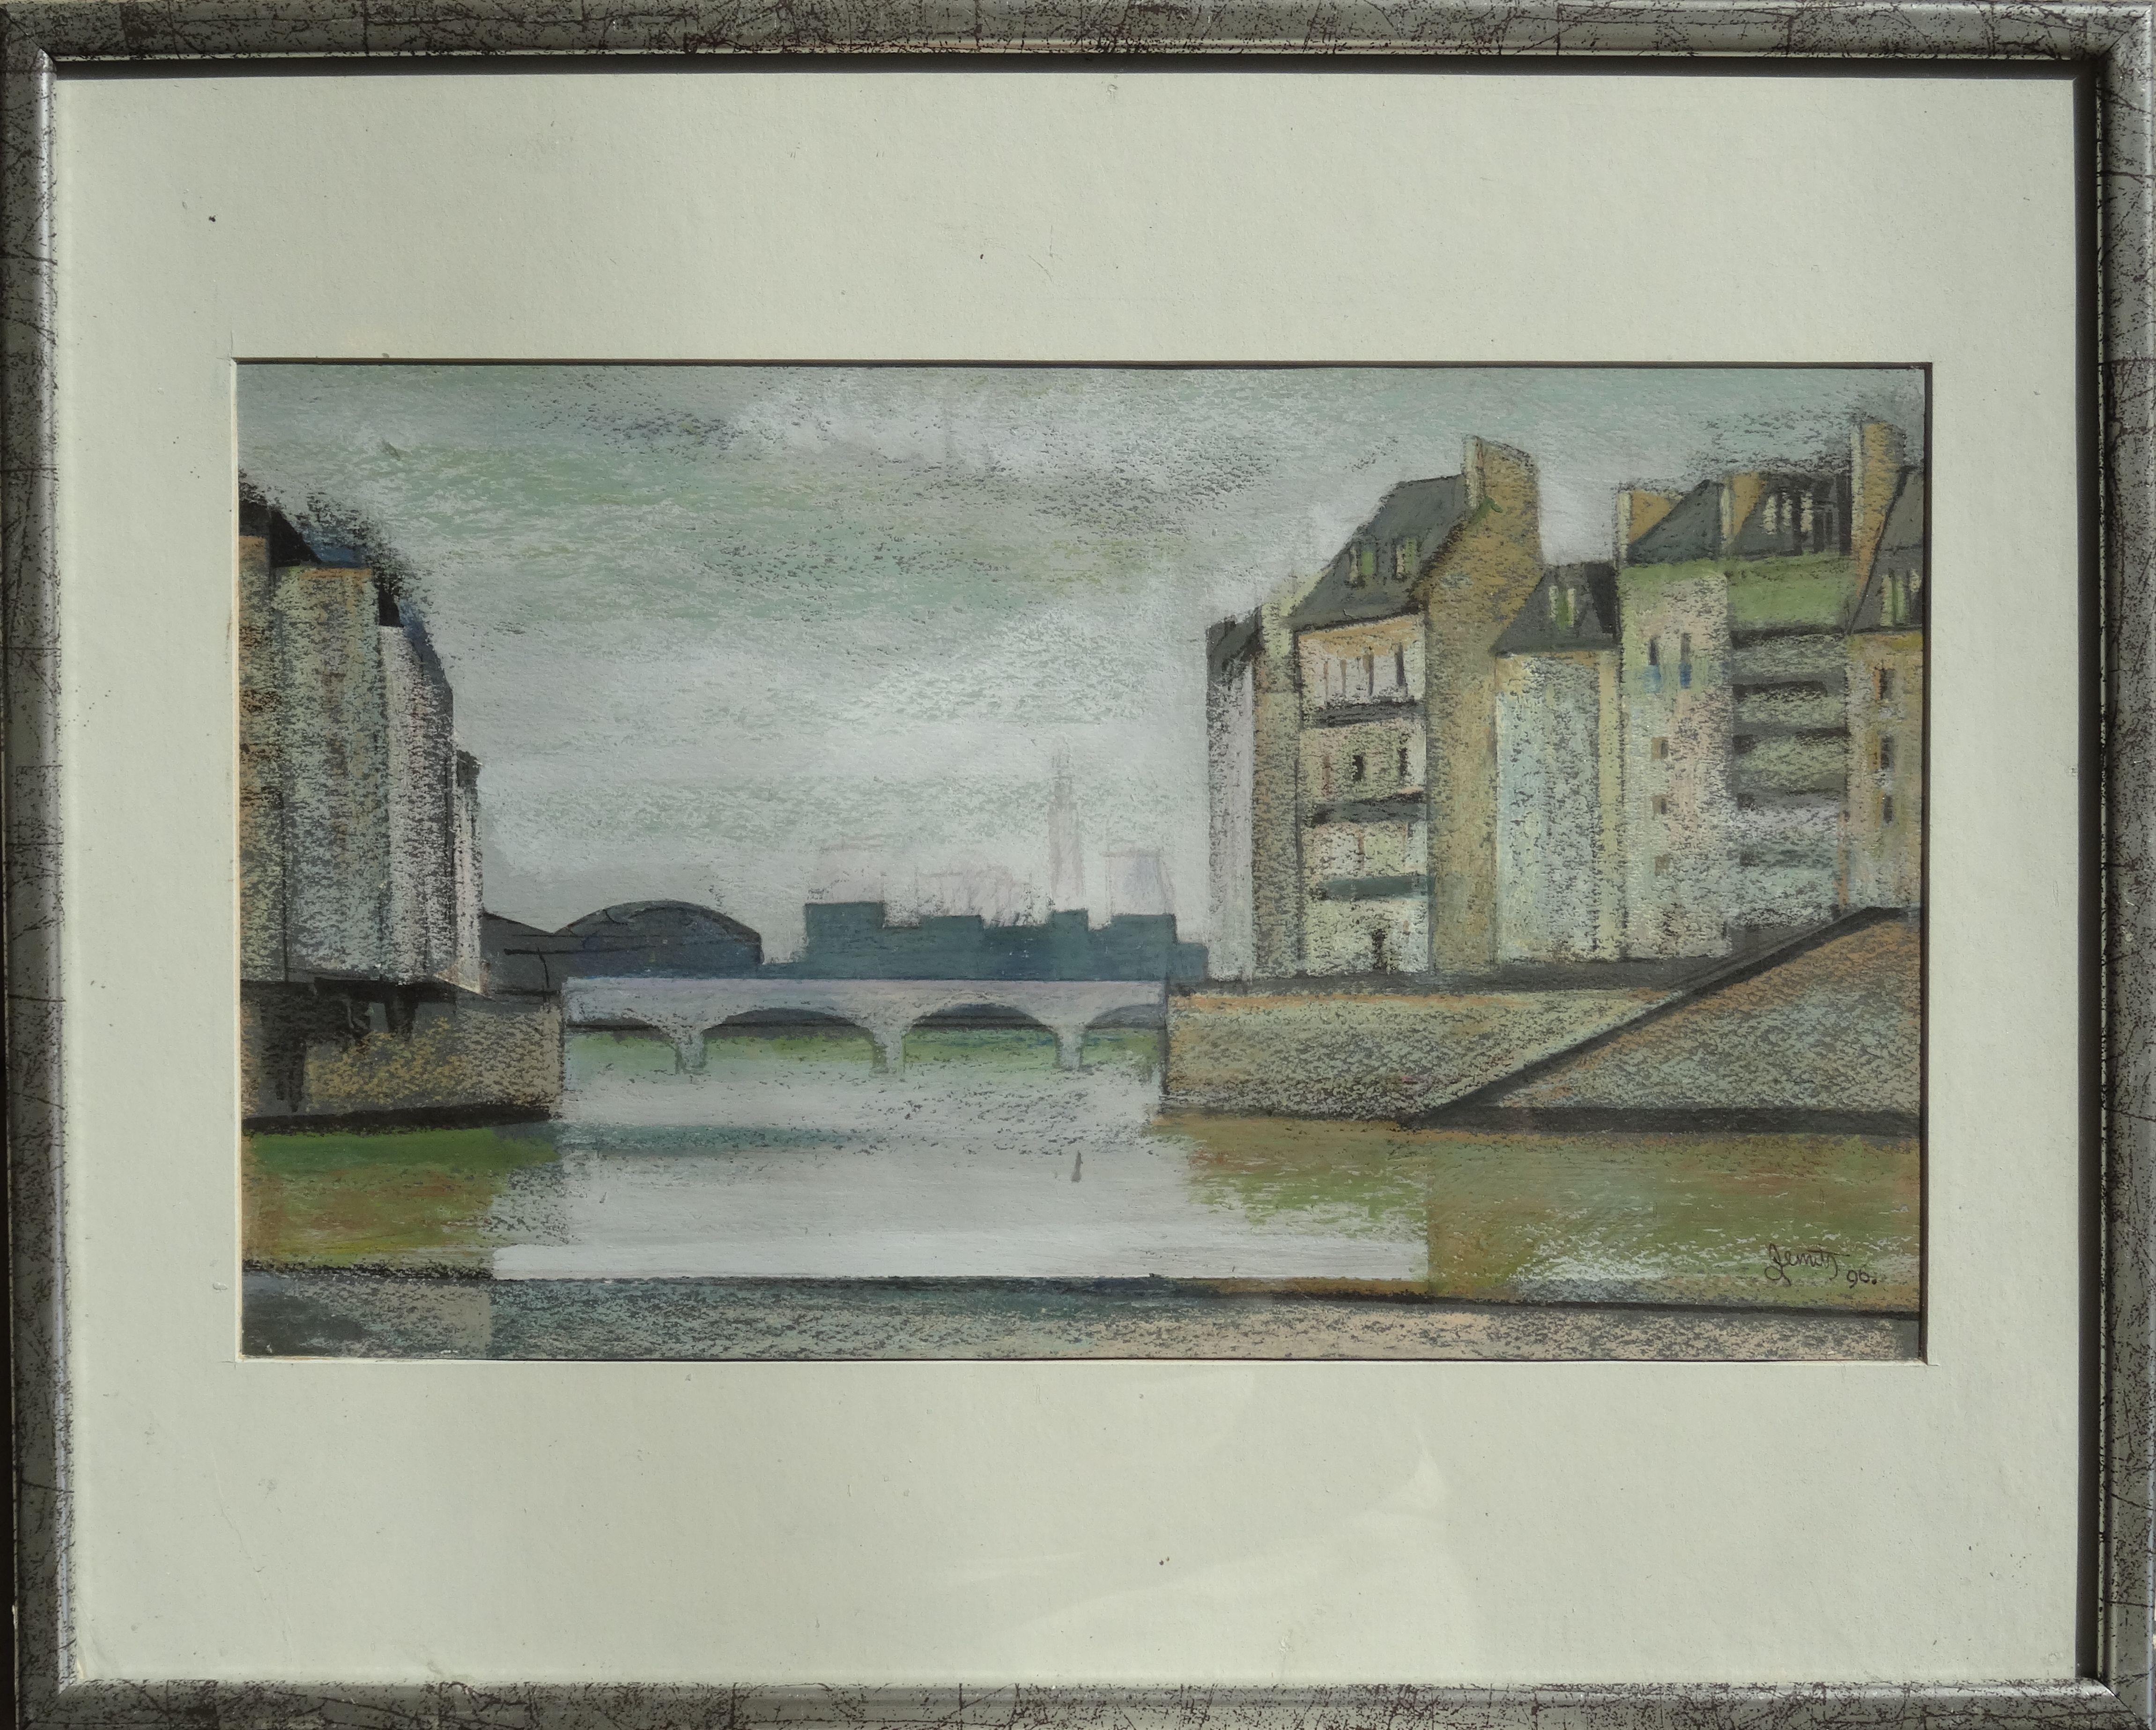 At the Seine. 1996. Paper, pastel, 24x41 cm - Painting by Janis Zemitis